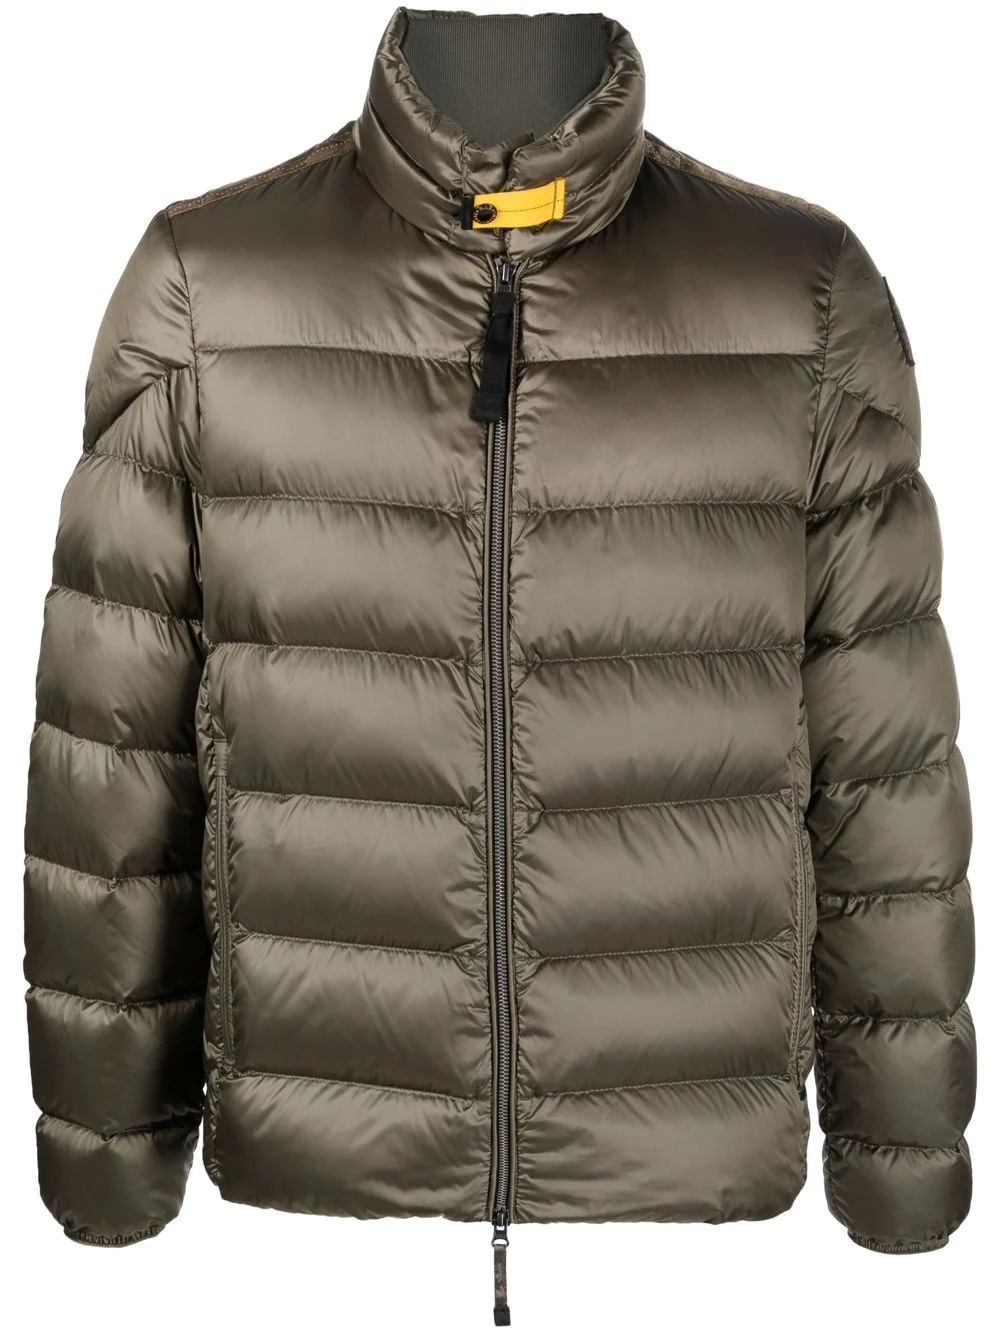 padded jacket with zip closure